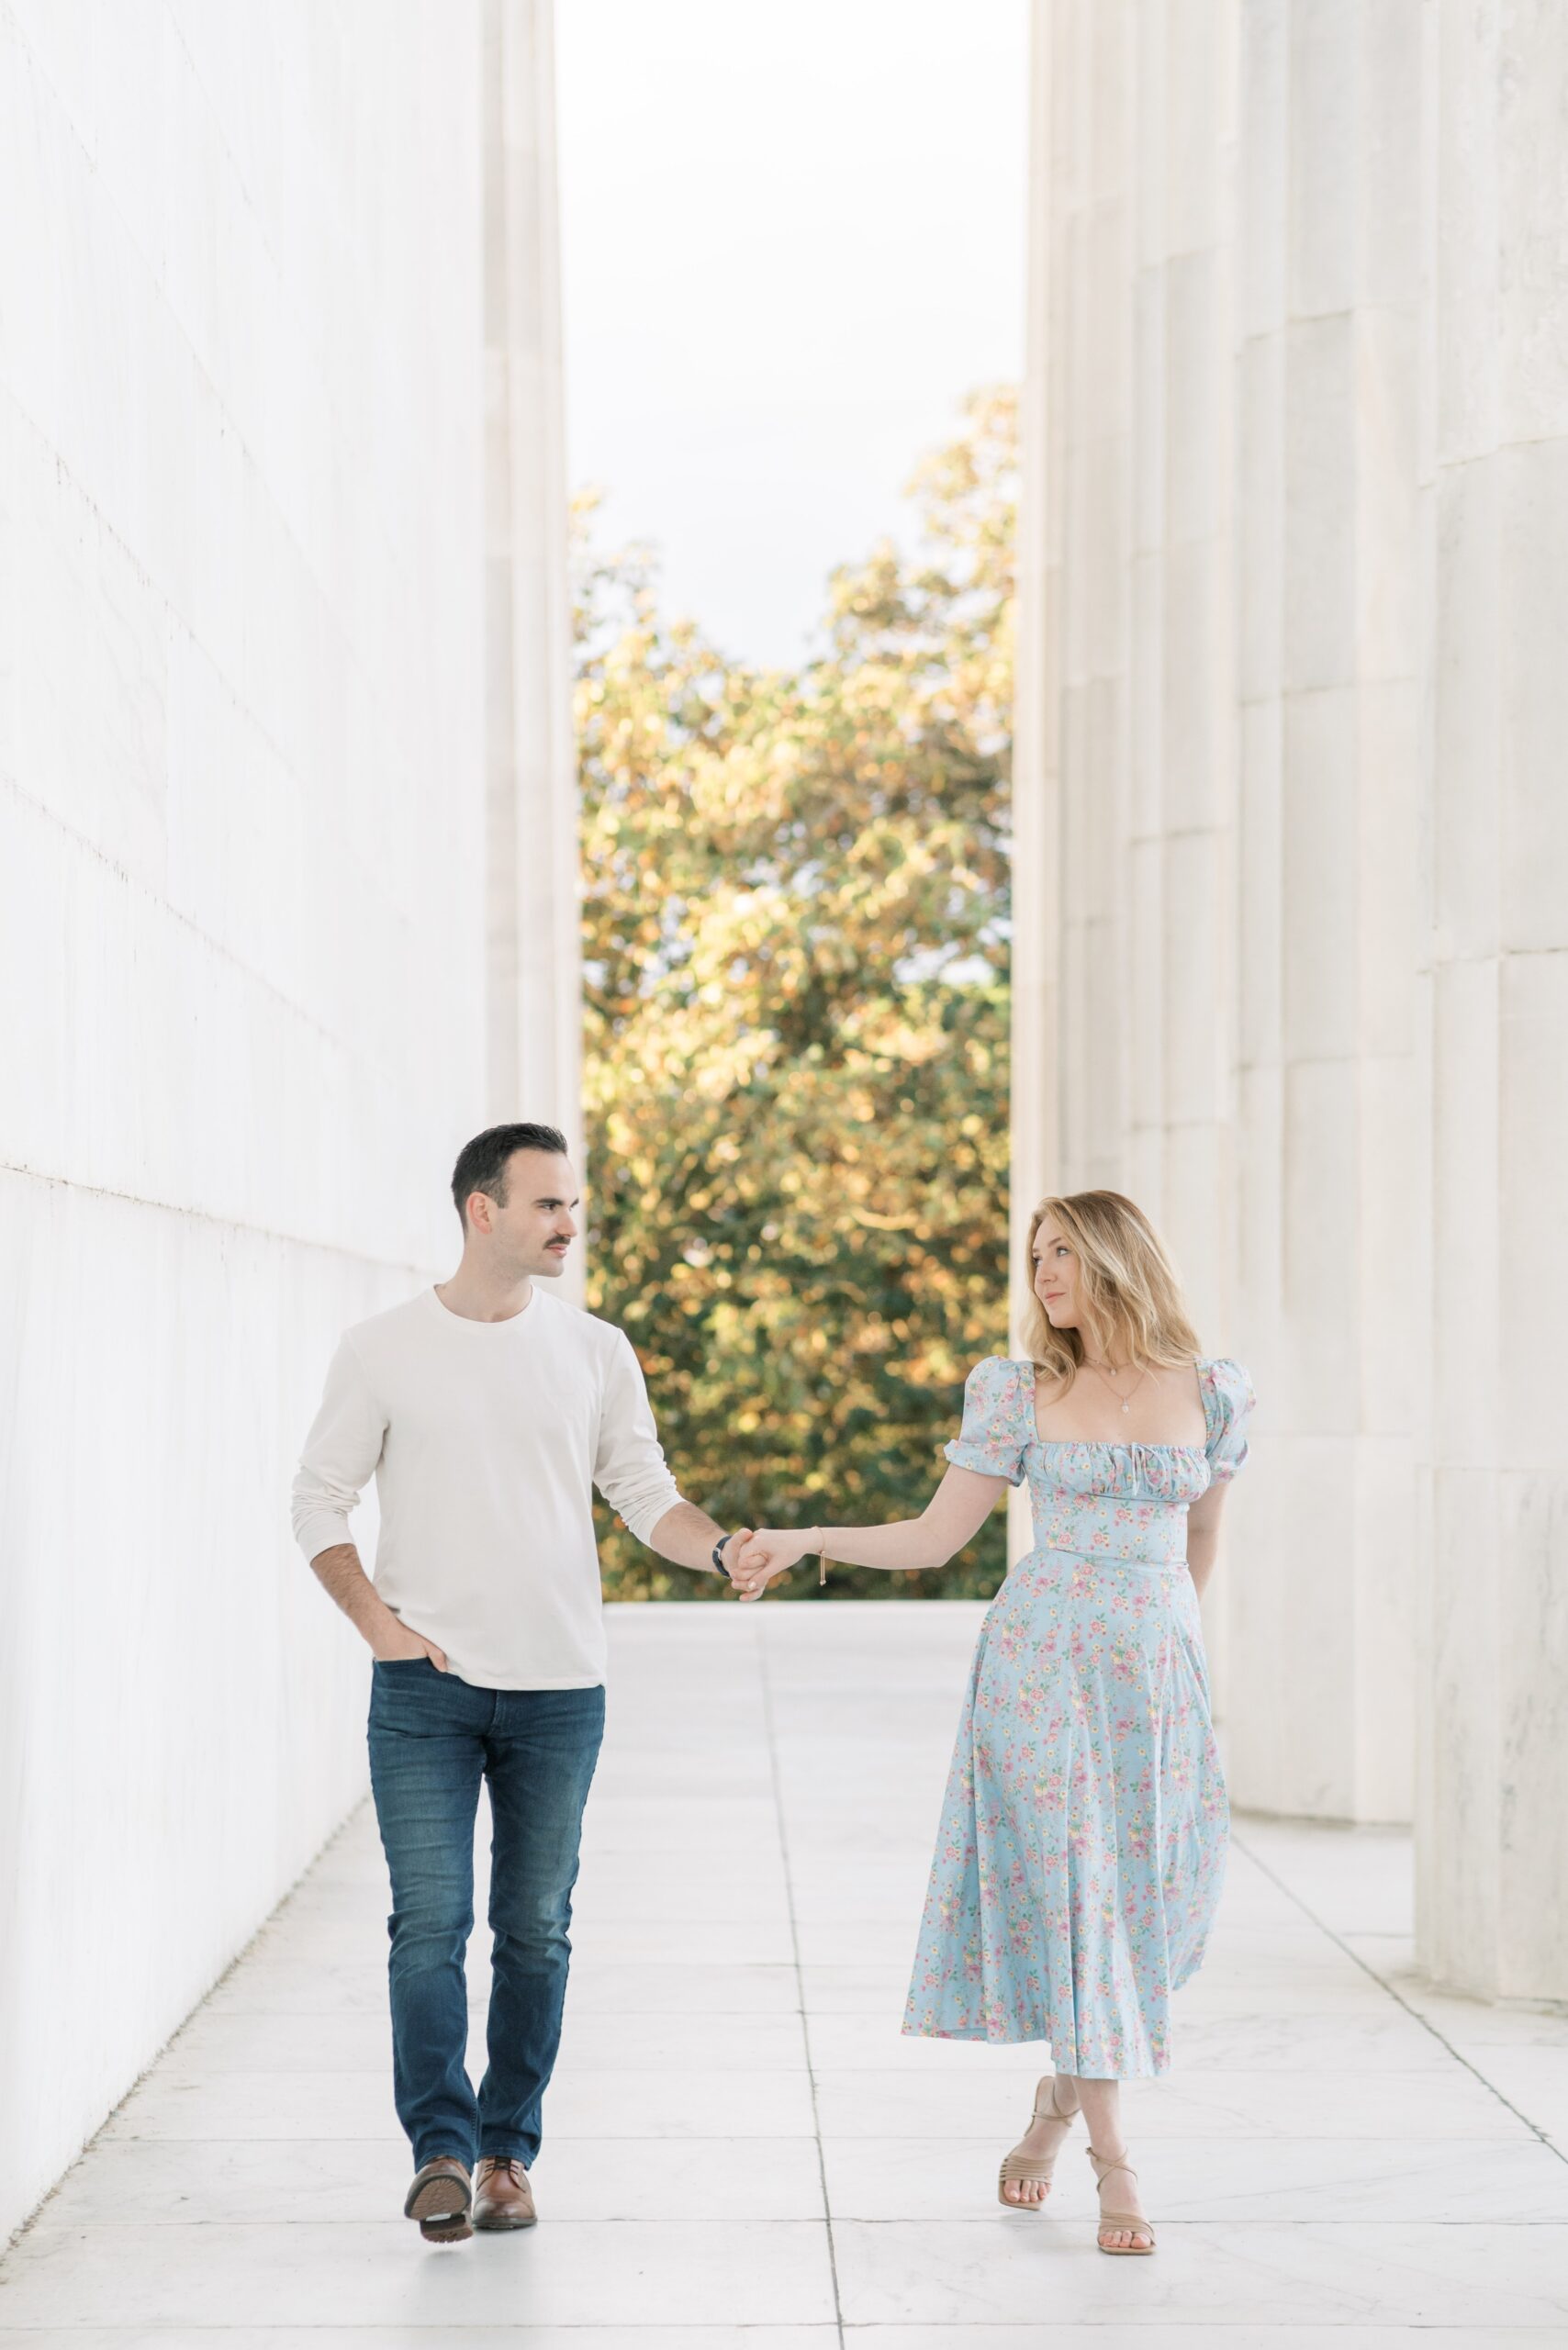 Reflecting Pool and Lincoln Memorial engagement photos at sunrise in Washington, DC.